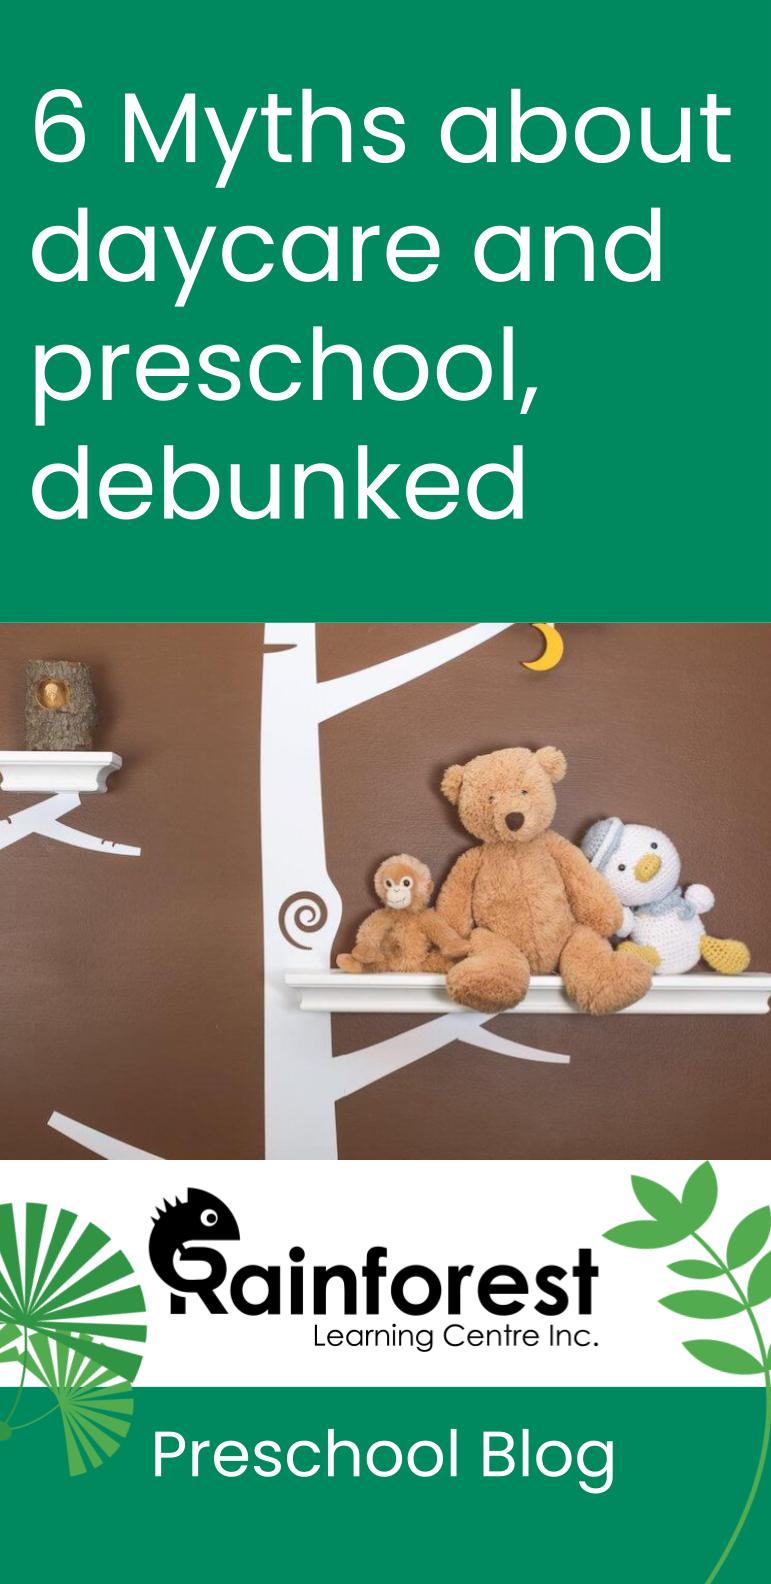 myths about daycare and preschool debunked - blog pinterest image